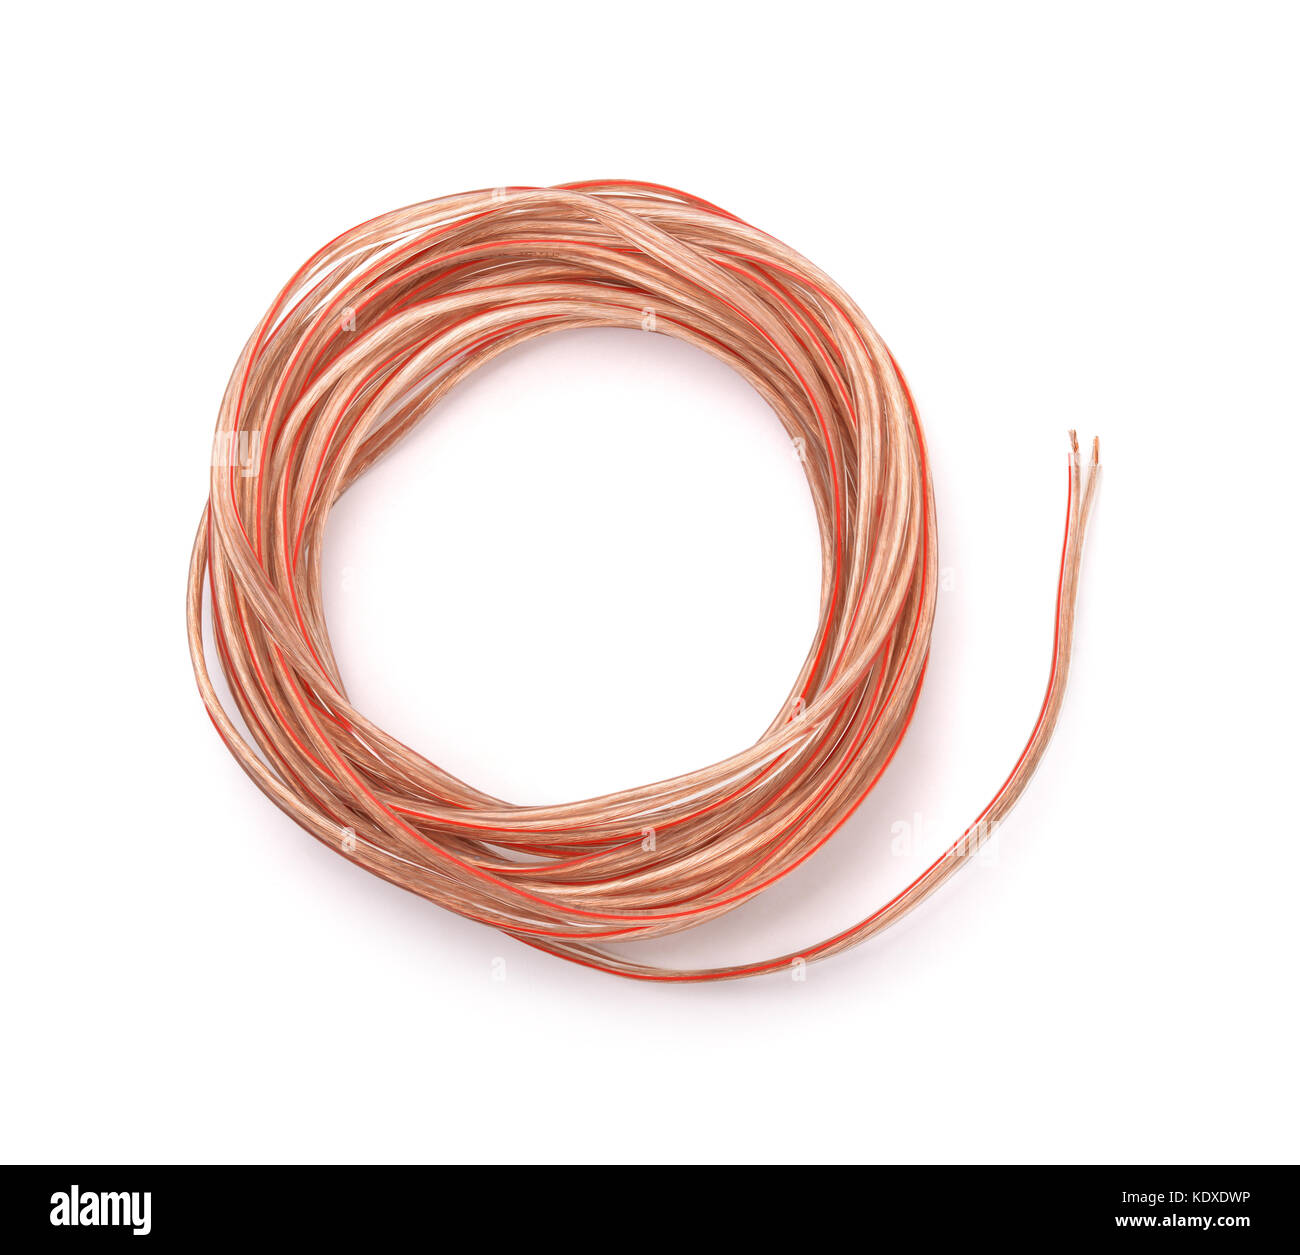 Top view of braided copper cable isolated on white Stock Photo